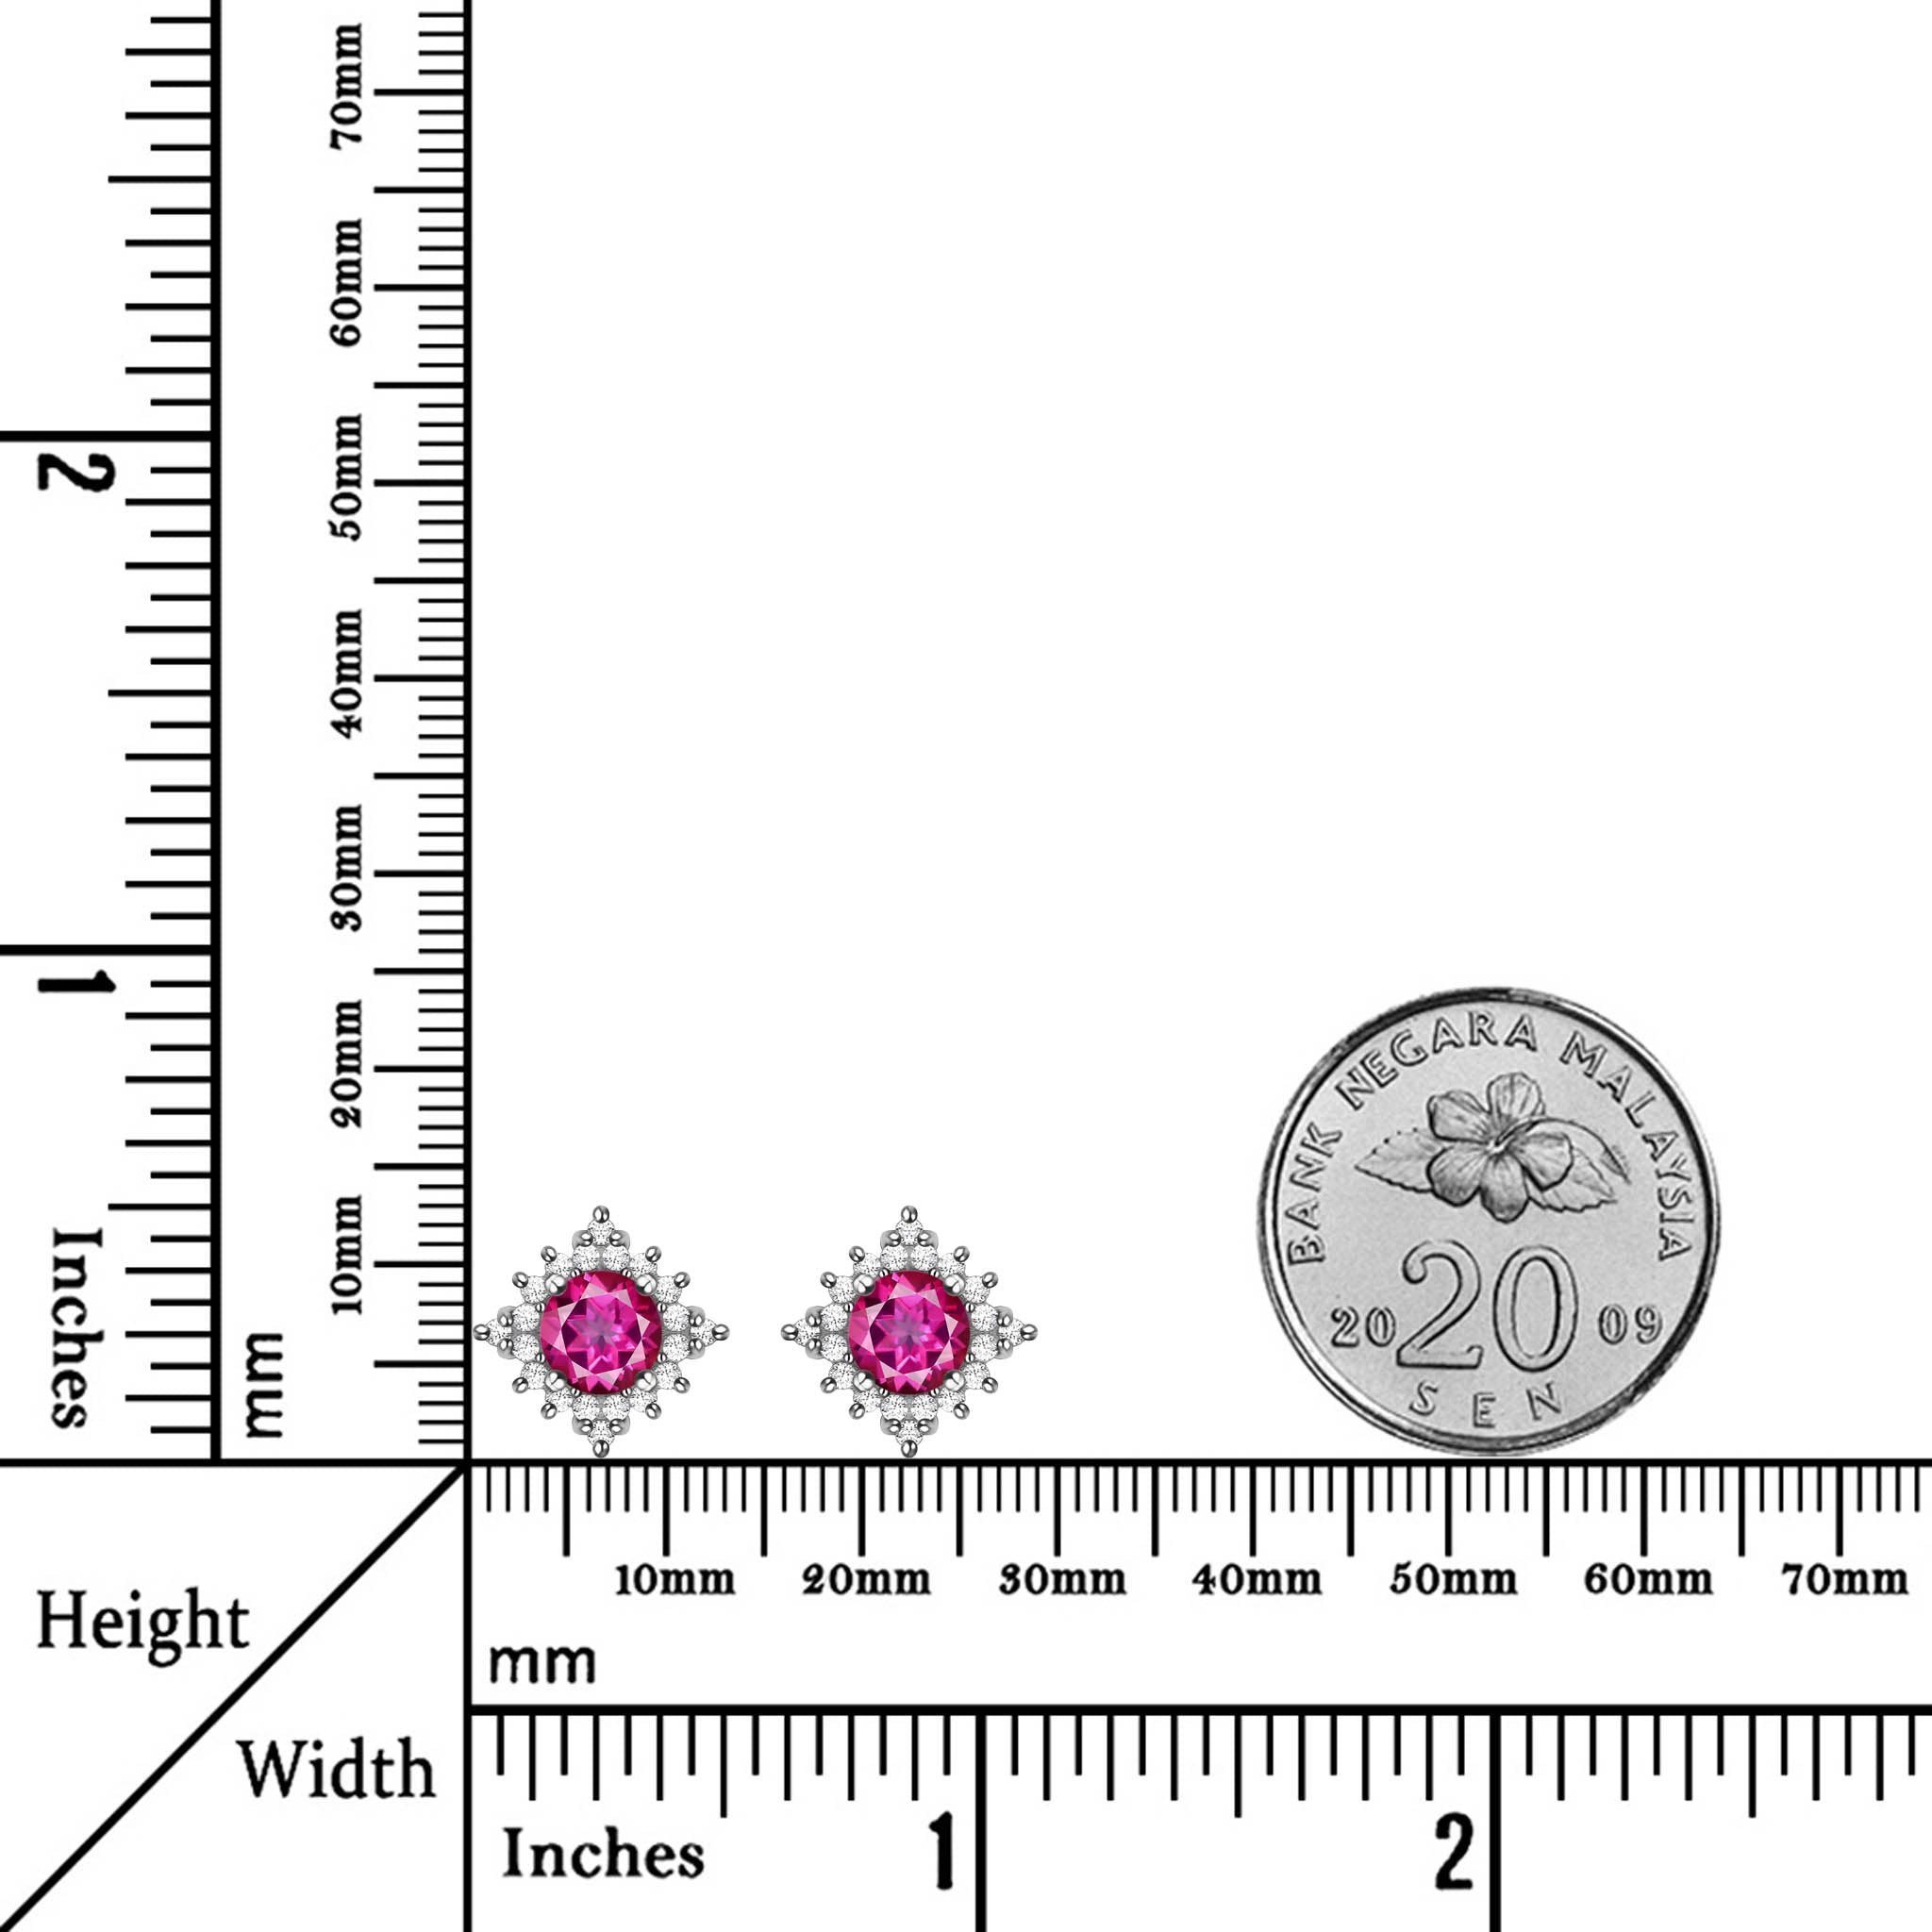 Dazzling Light Natural Round Pink Topaz Sterling Silver Stud Earrings